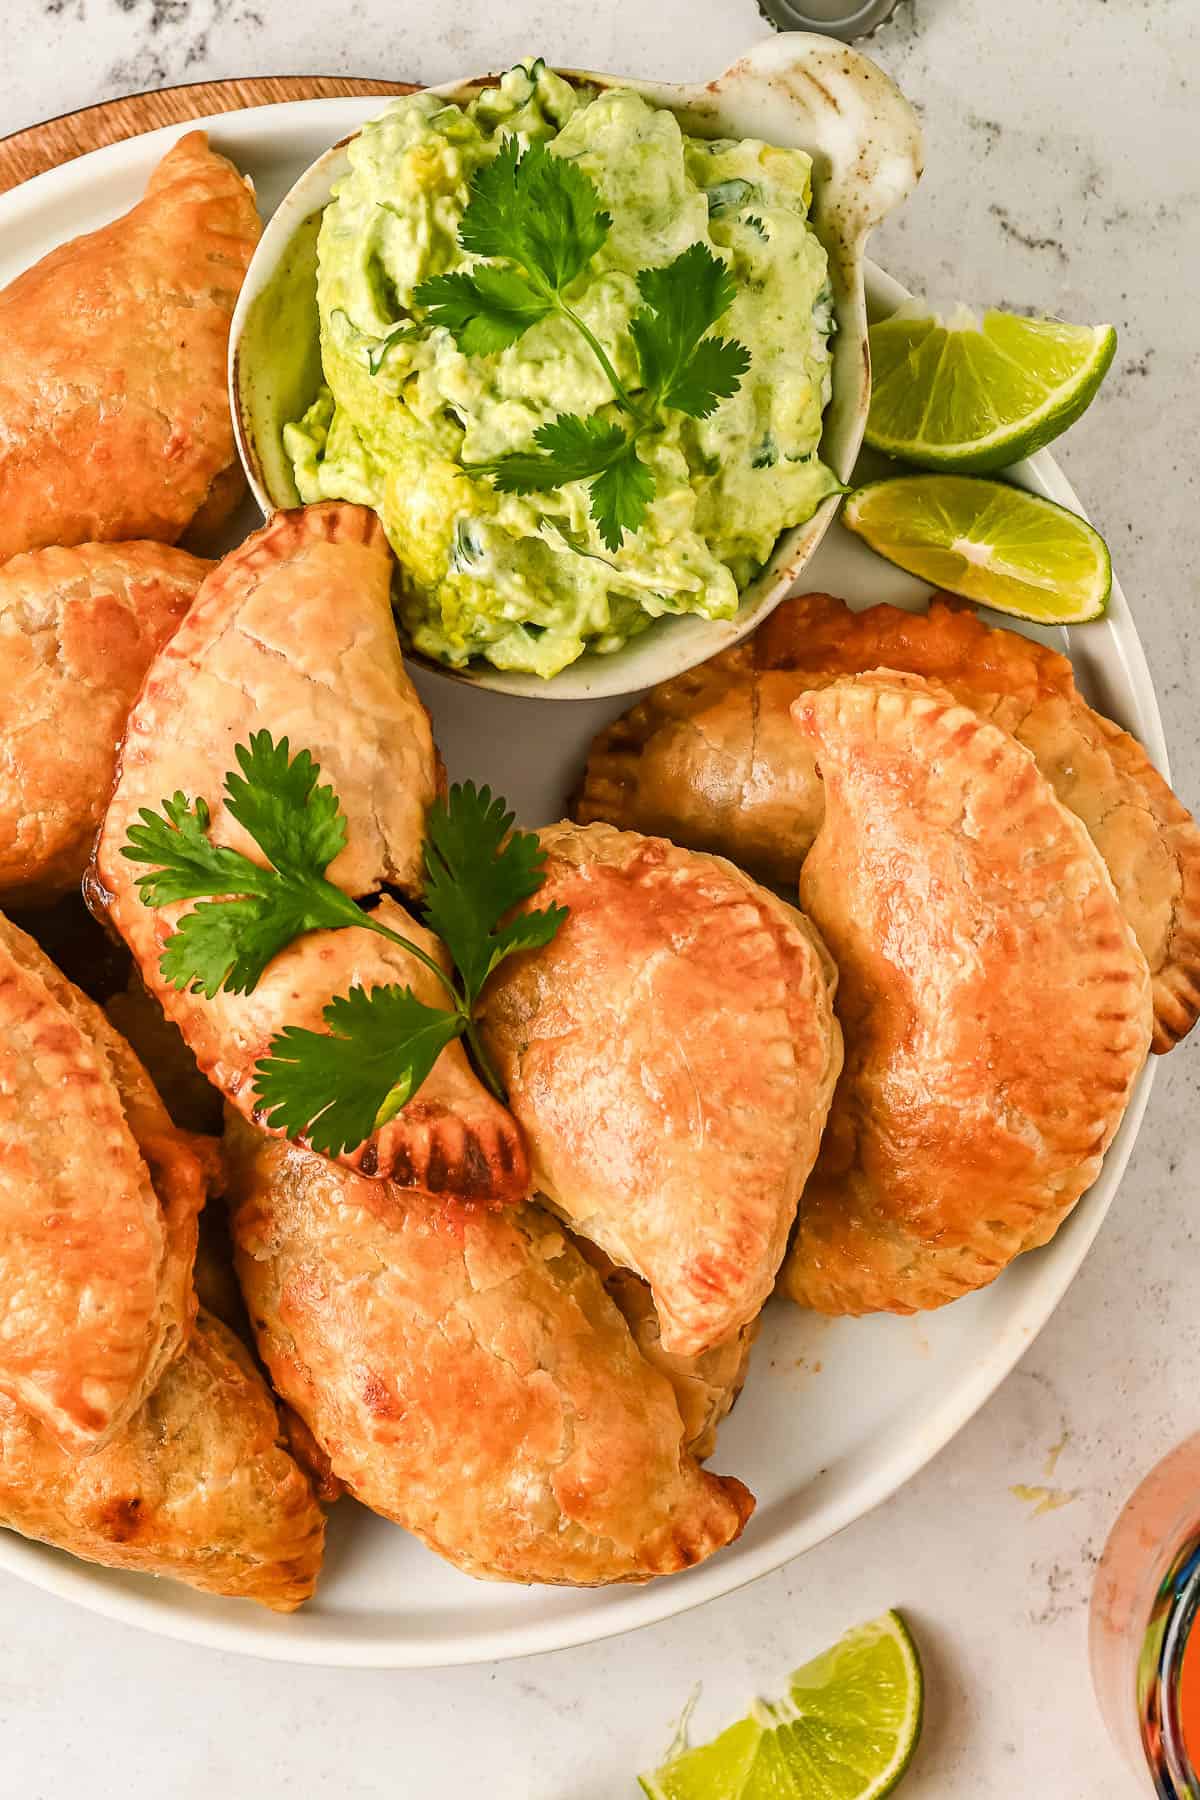 Chicken empanadas on a plate with a bowl of avocado crema for dipping.